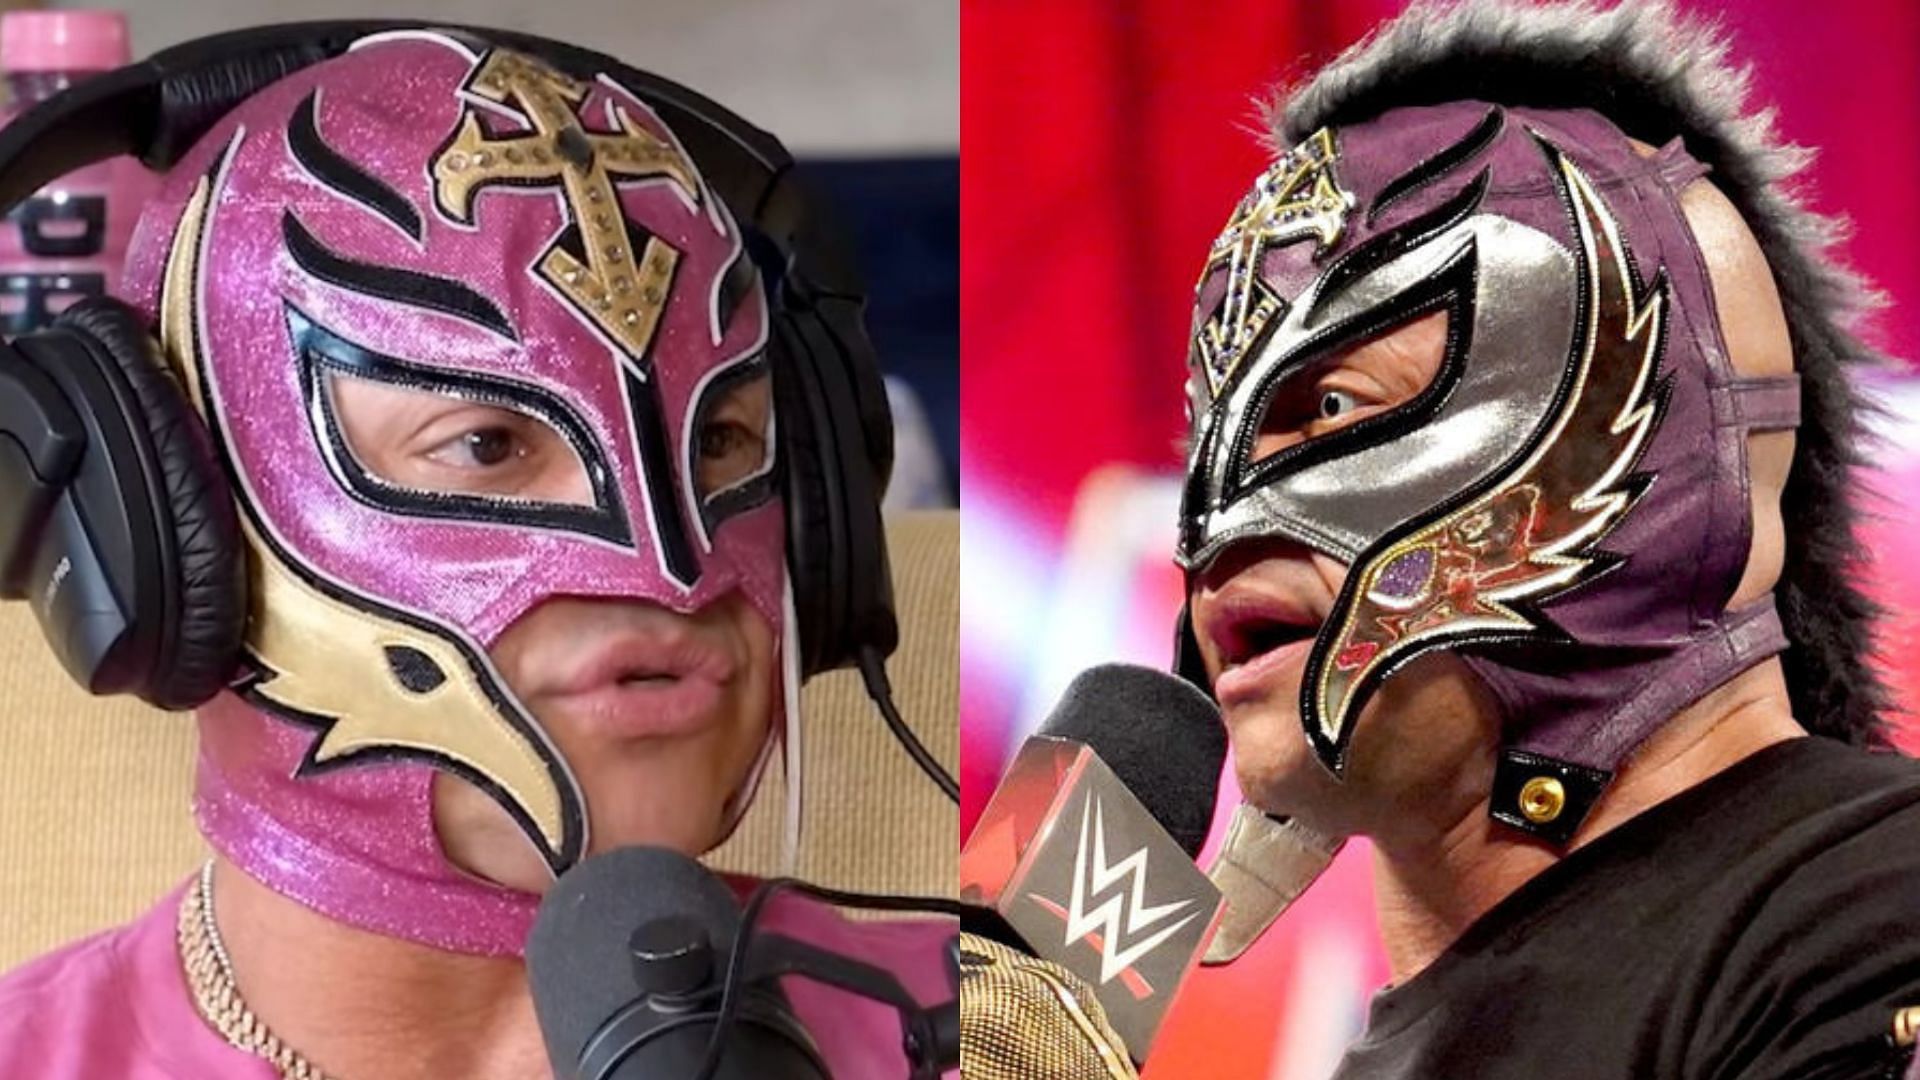 Rey Mysterio was inducted into the WWE Hall of Fame this year.